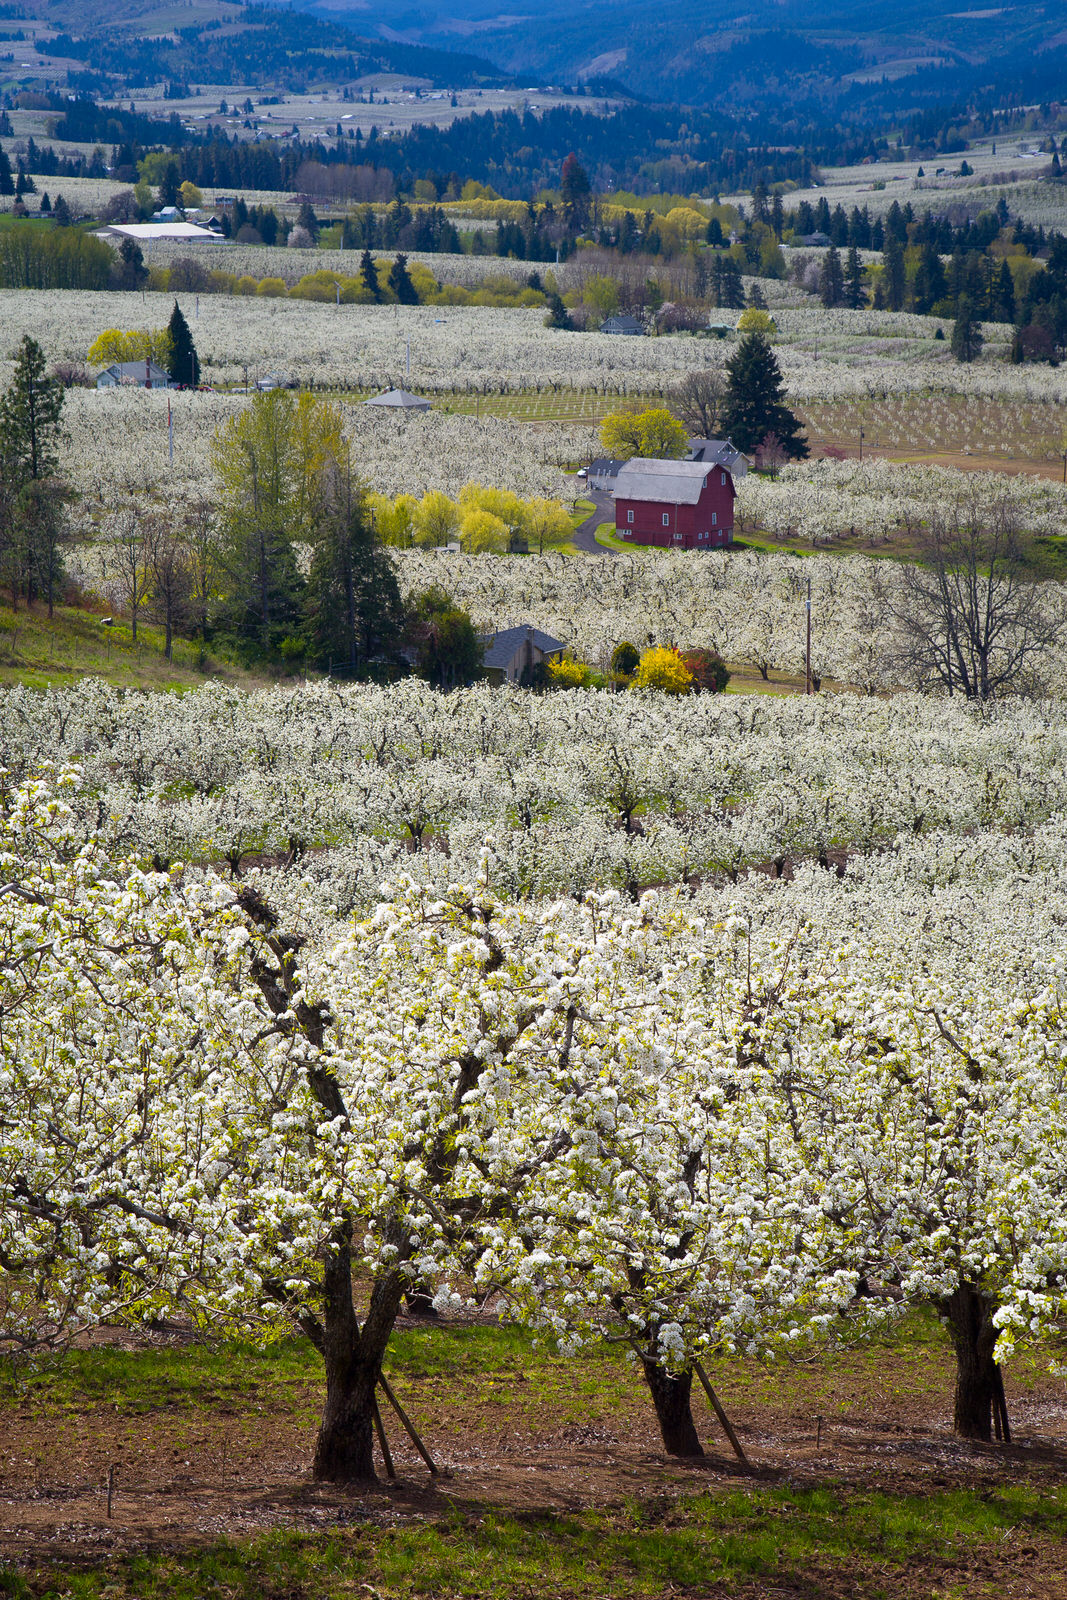  Orchards in bloom in Hood River, Oregon 